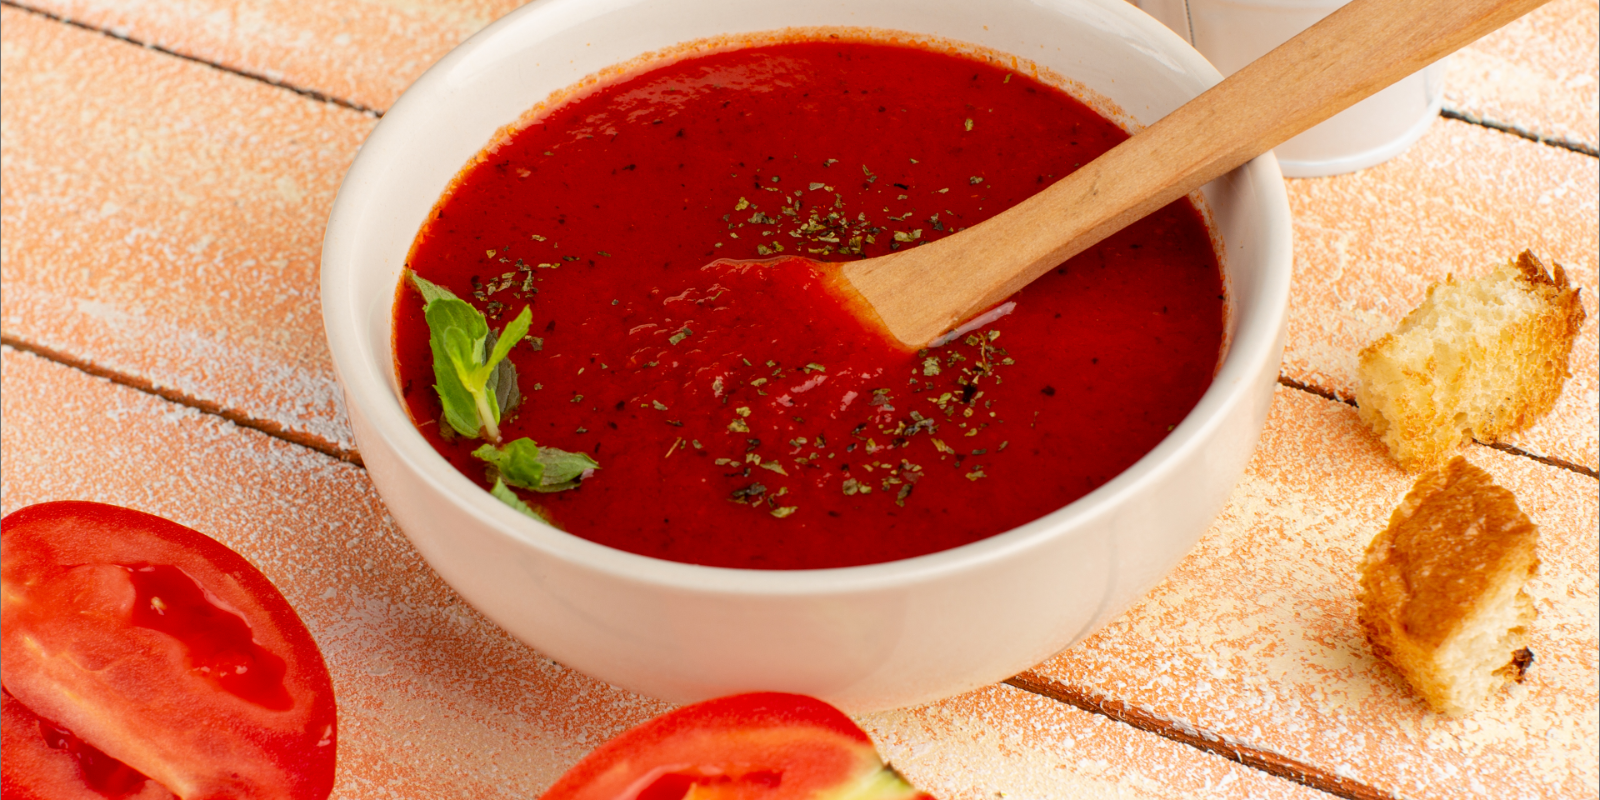 delicious-tomato-sauce-with-fresh-sliced-tomatoes-on-cream-soup-food-meal-dinner